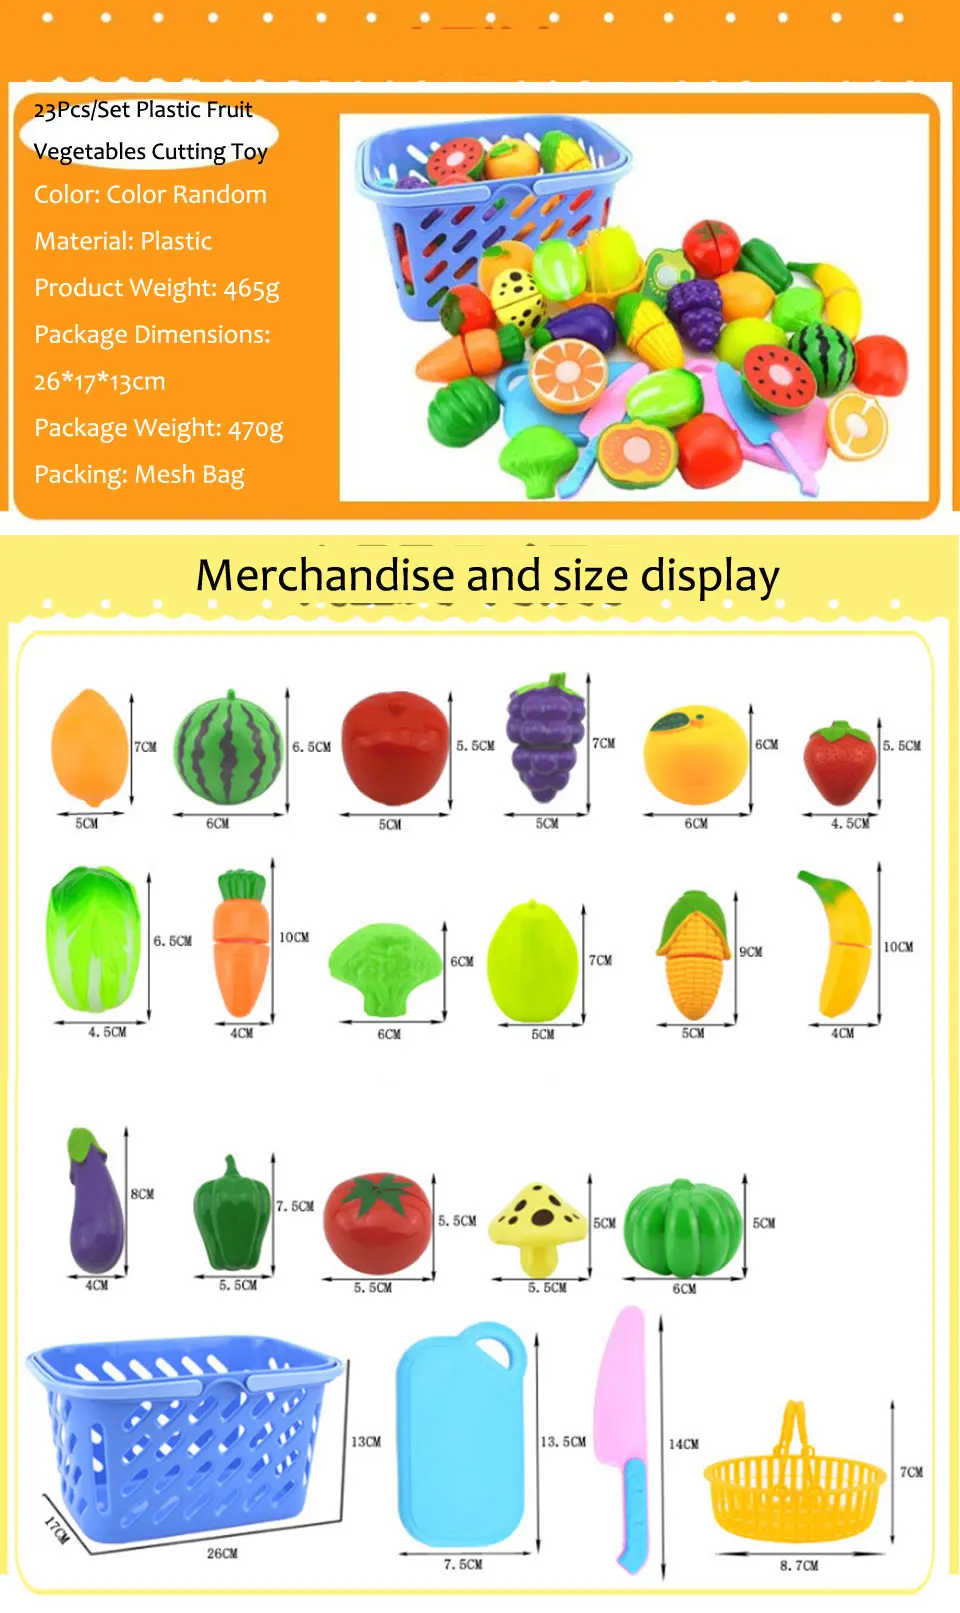 Surwish 23Pcs/Set Plastic Fruit Vegetables Cutting Toy Early Development and Education Toy for Baby - Color Random 17